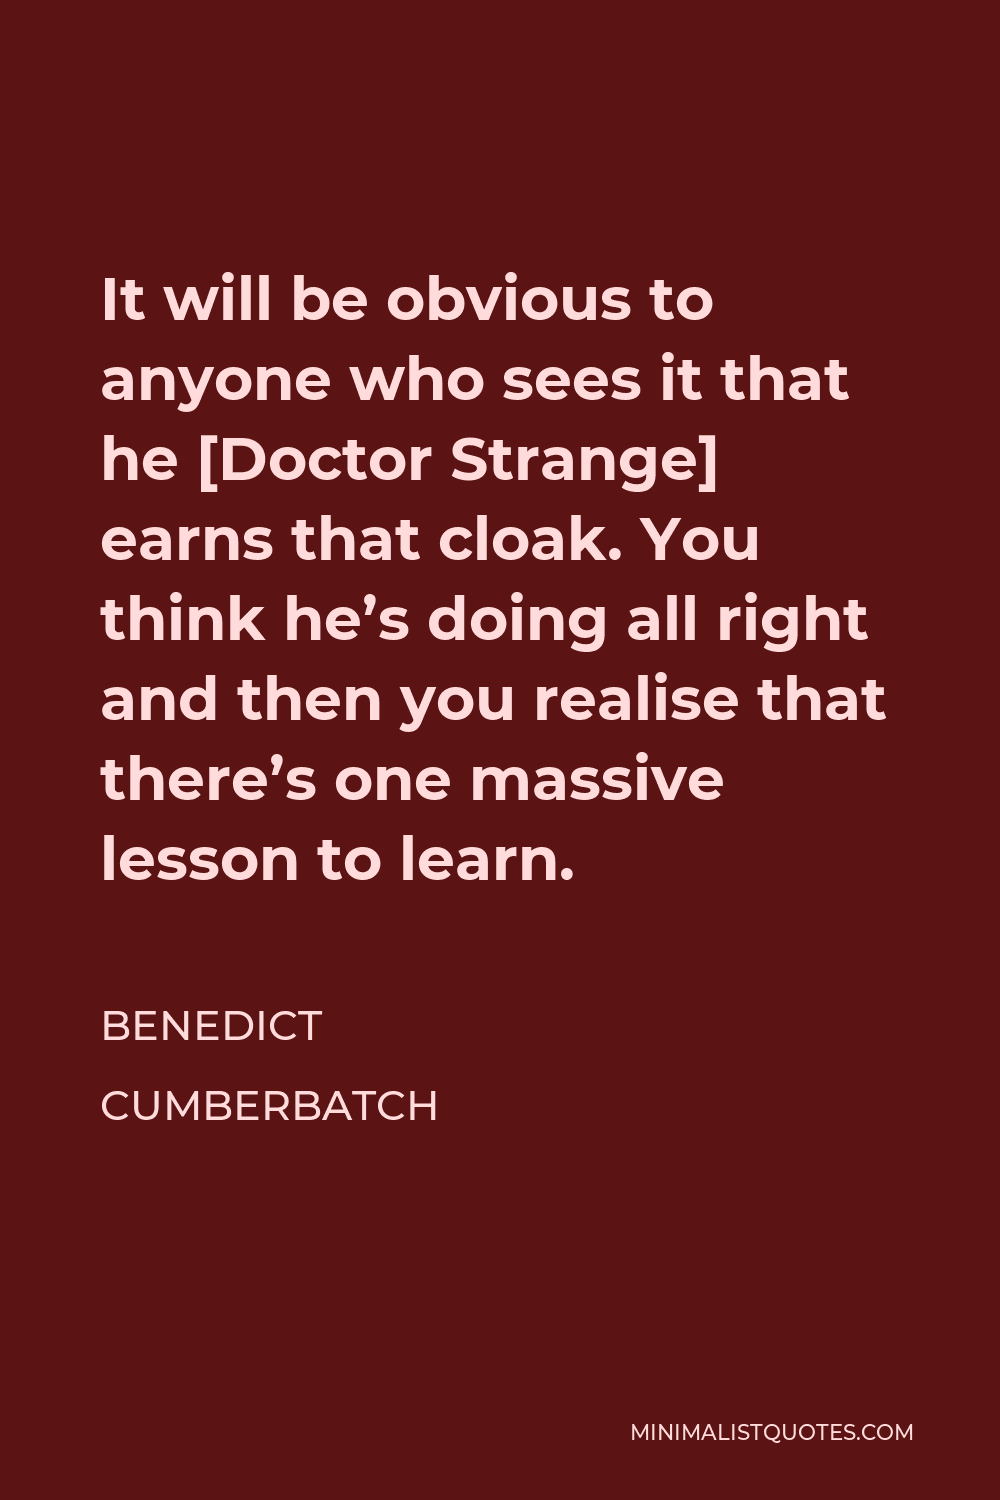 Benedict Cumberbatch Quote - It will be obvious to anyone who sees it that he [Doctor Strange] earns that cloak. You think he’s doing all right and then you realise that there’s one massive lesson to learn.